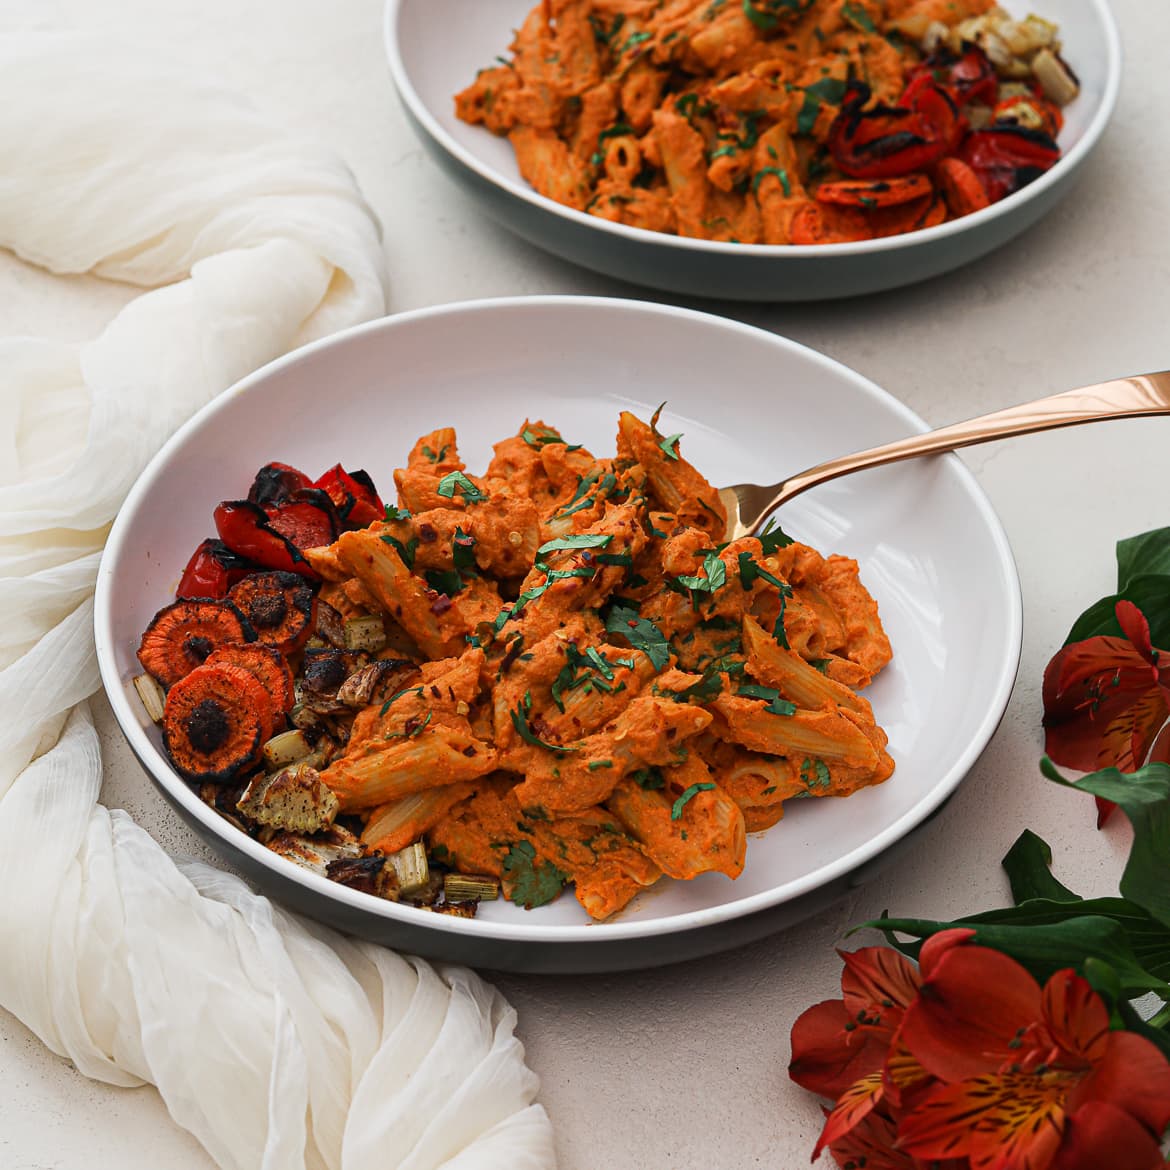 two bowls of creamy vegan pasta Indian style with a side of roasted vegetables and flowers in the foreground